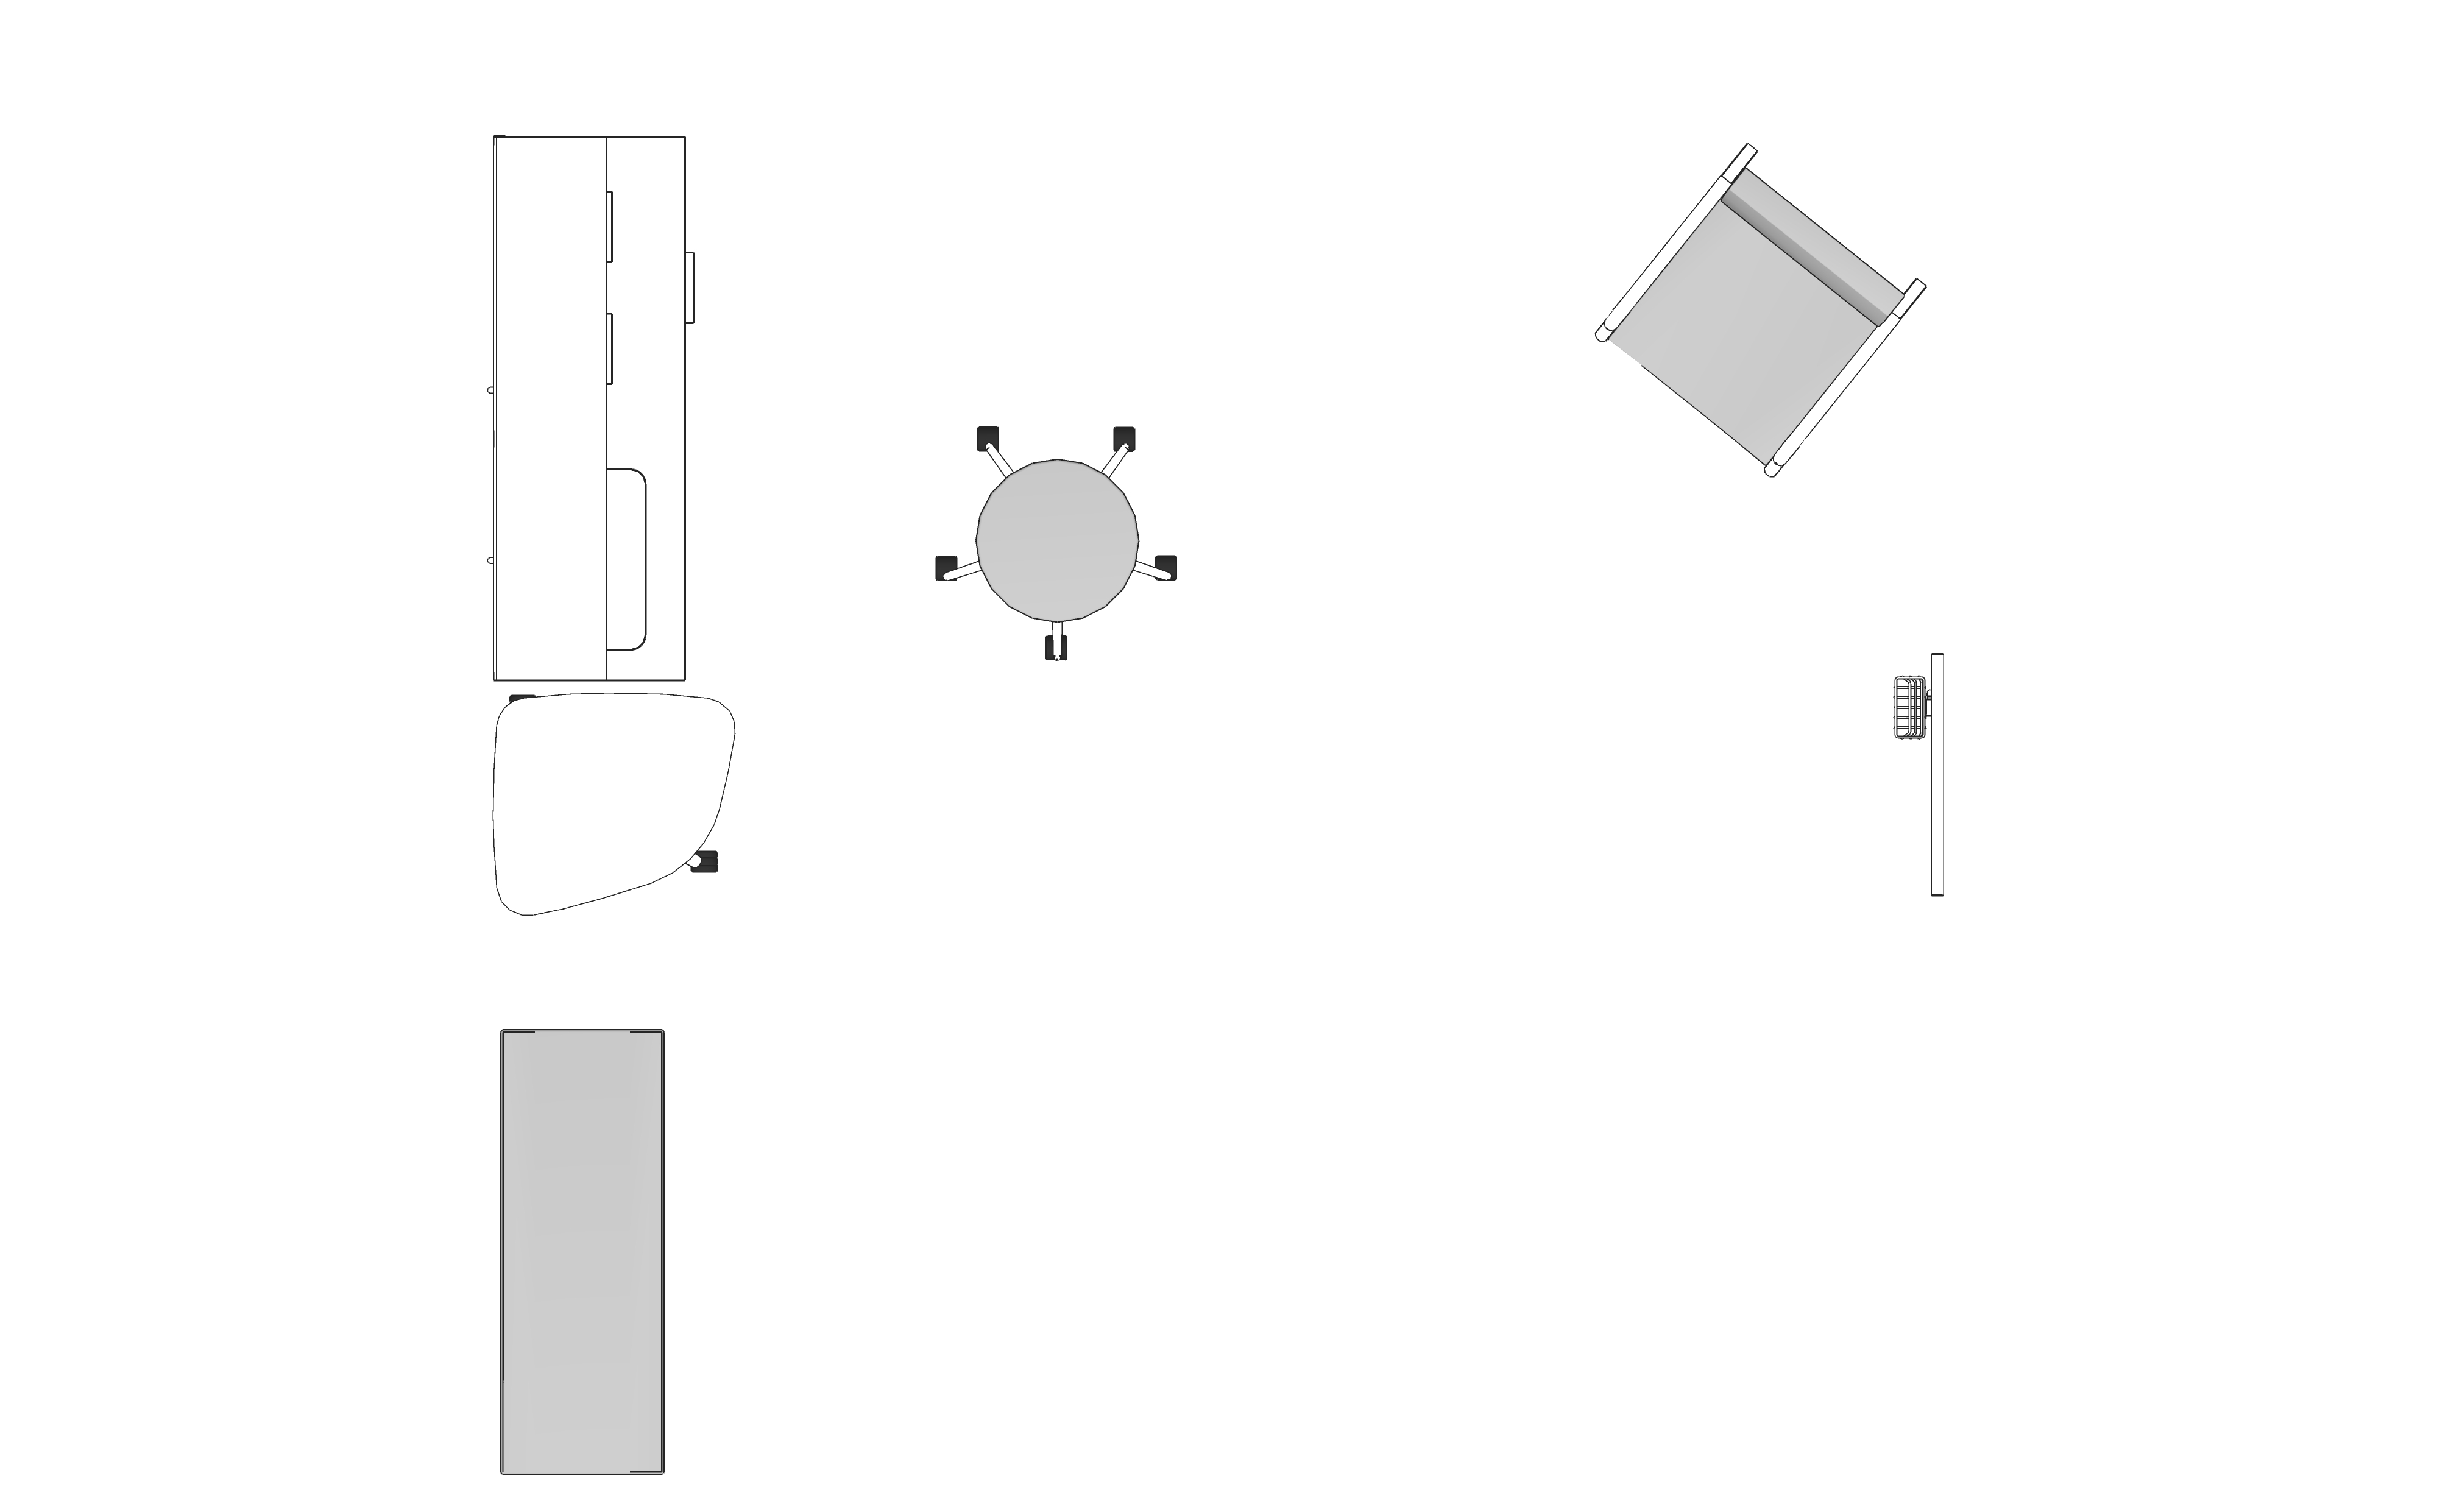 A line drawing viewed from above - Exam Room 018